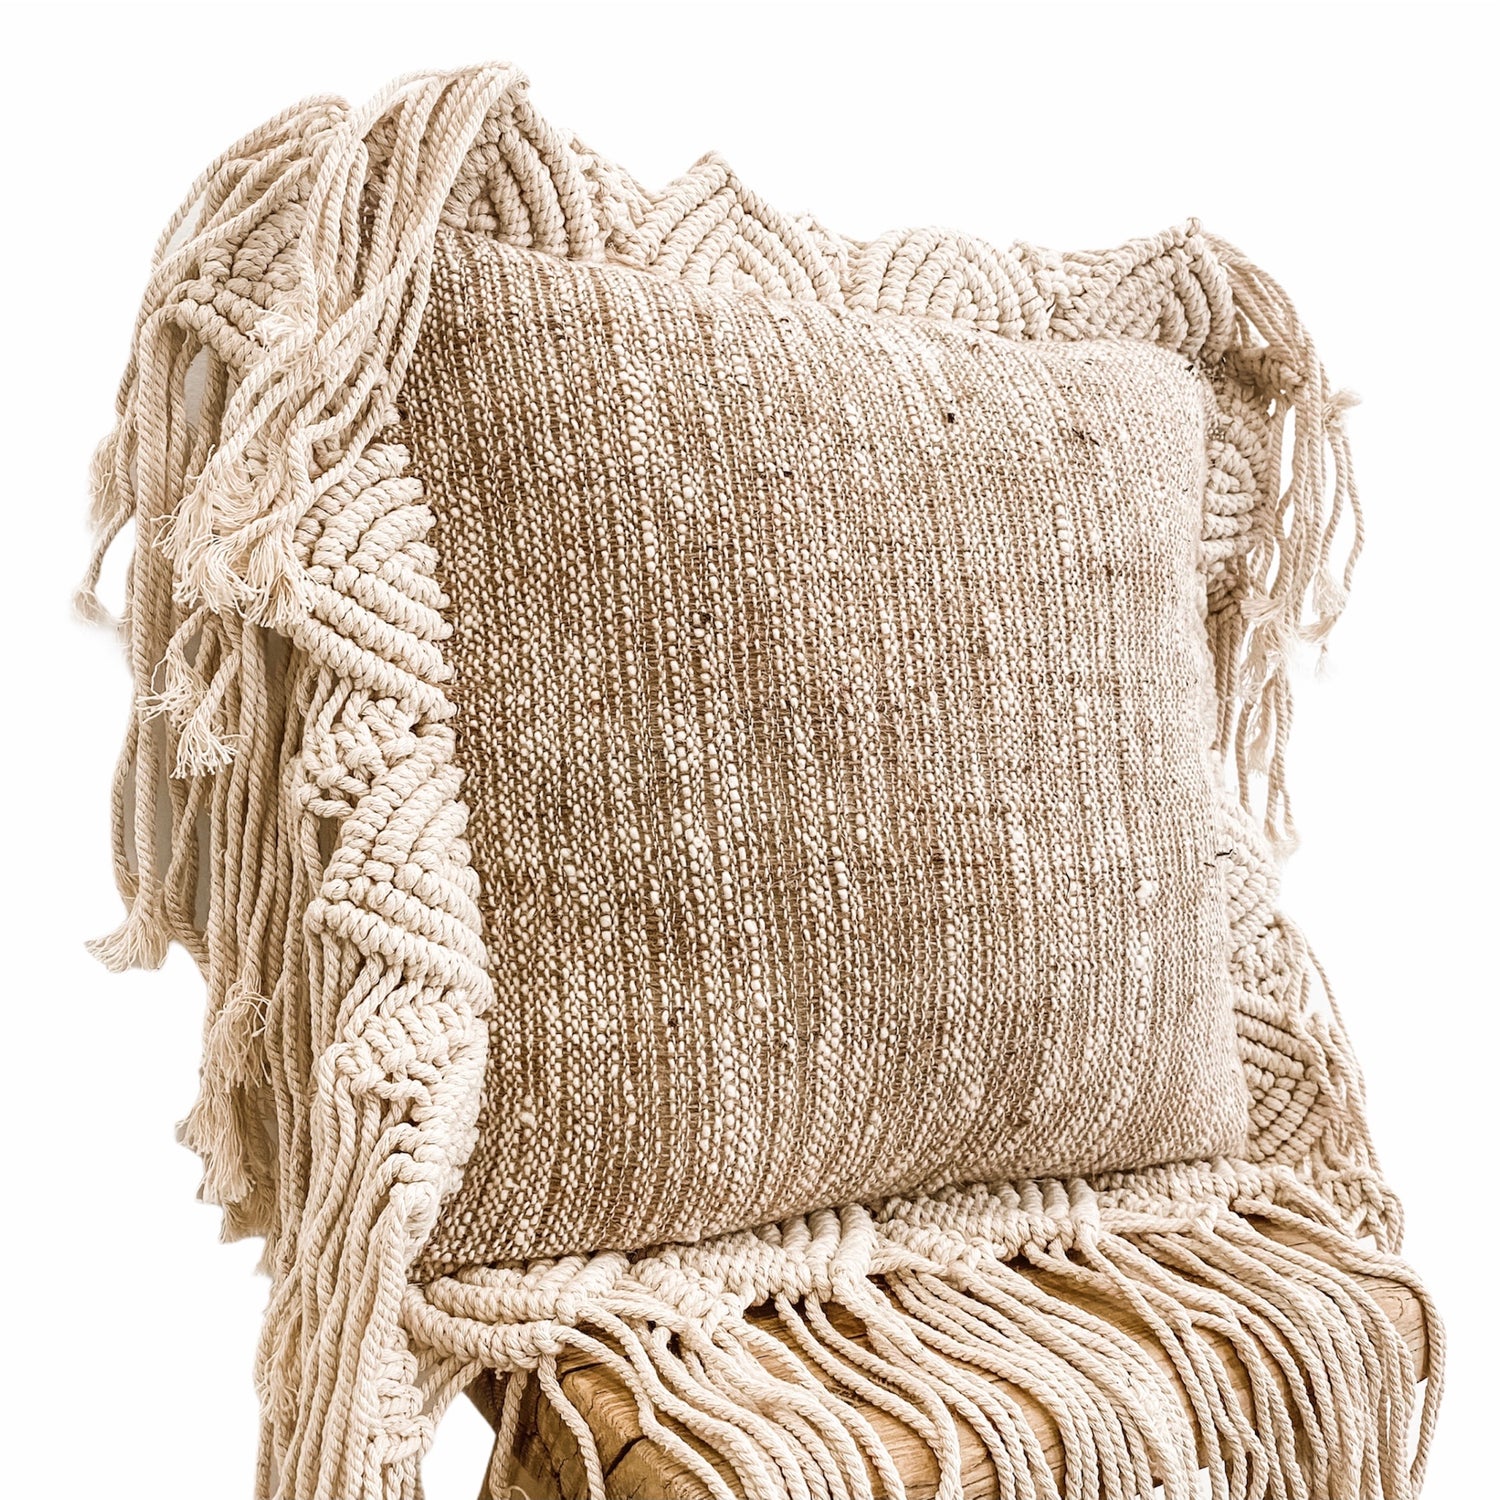 Square Summer Breeze Cushion featuring cotton and jute base and macrame fringe